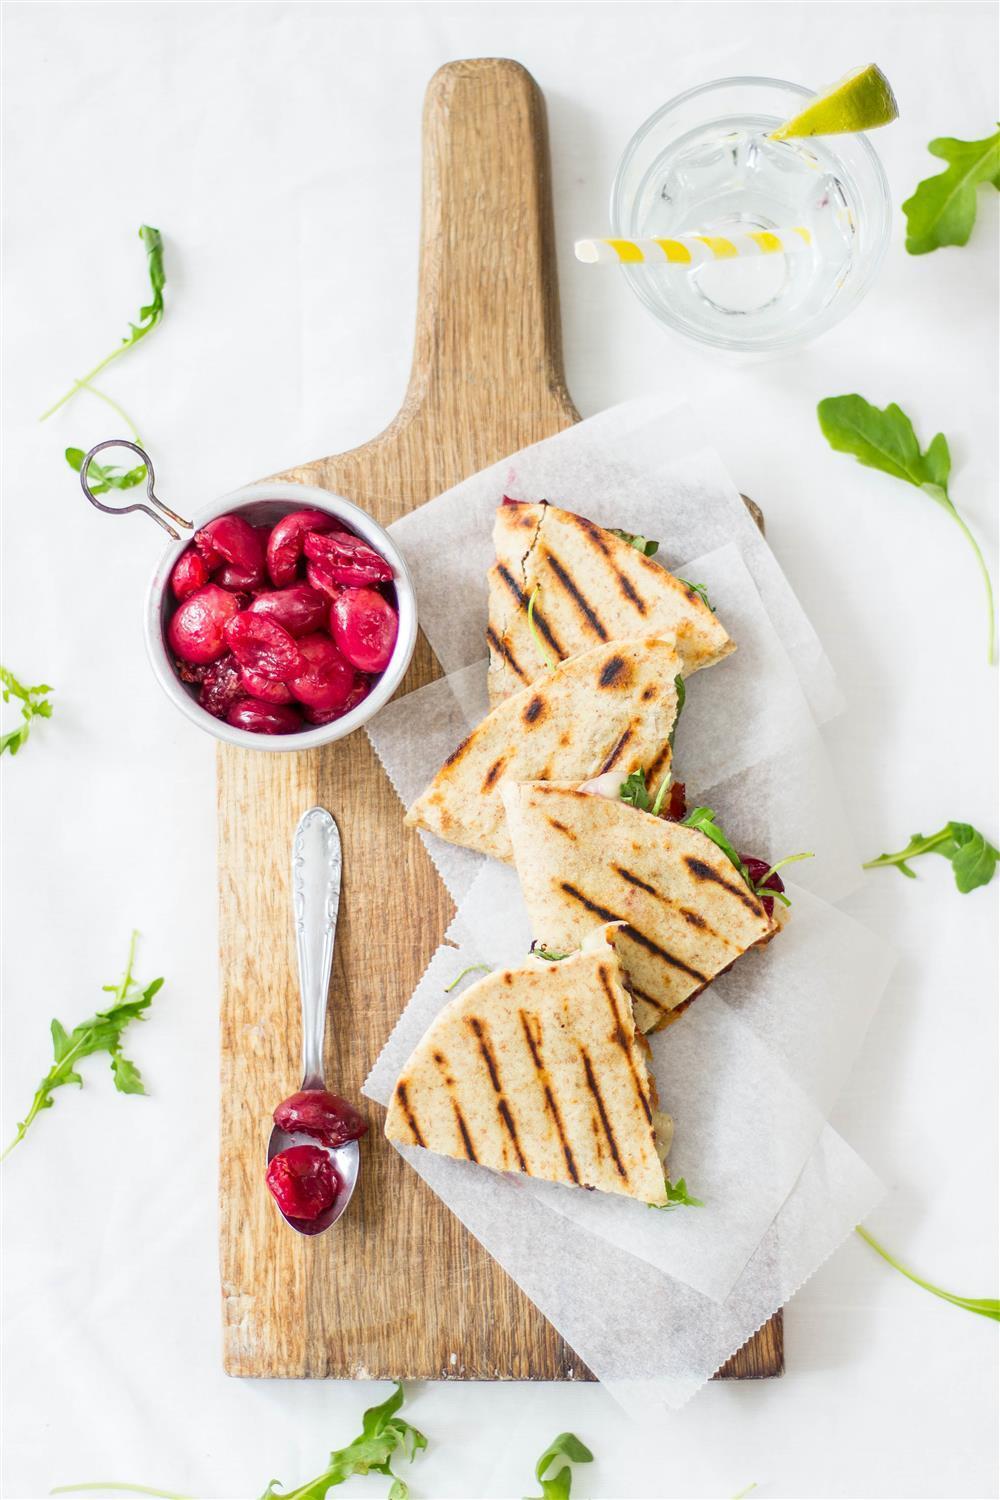 Use Your Noodles - Cherry, Brie & Bacon Grilled Quesadilla